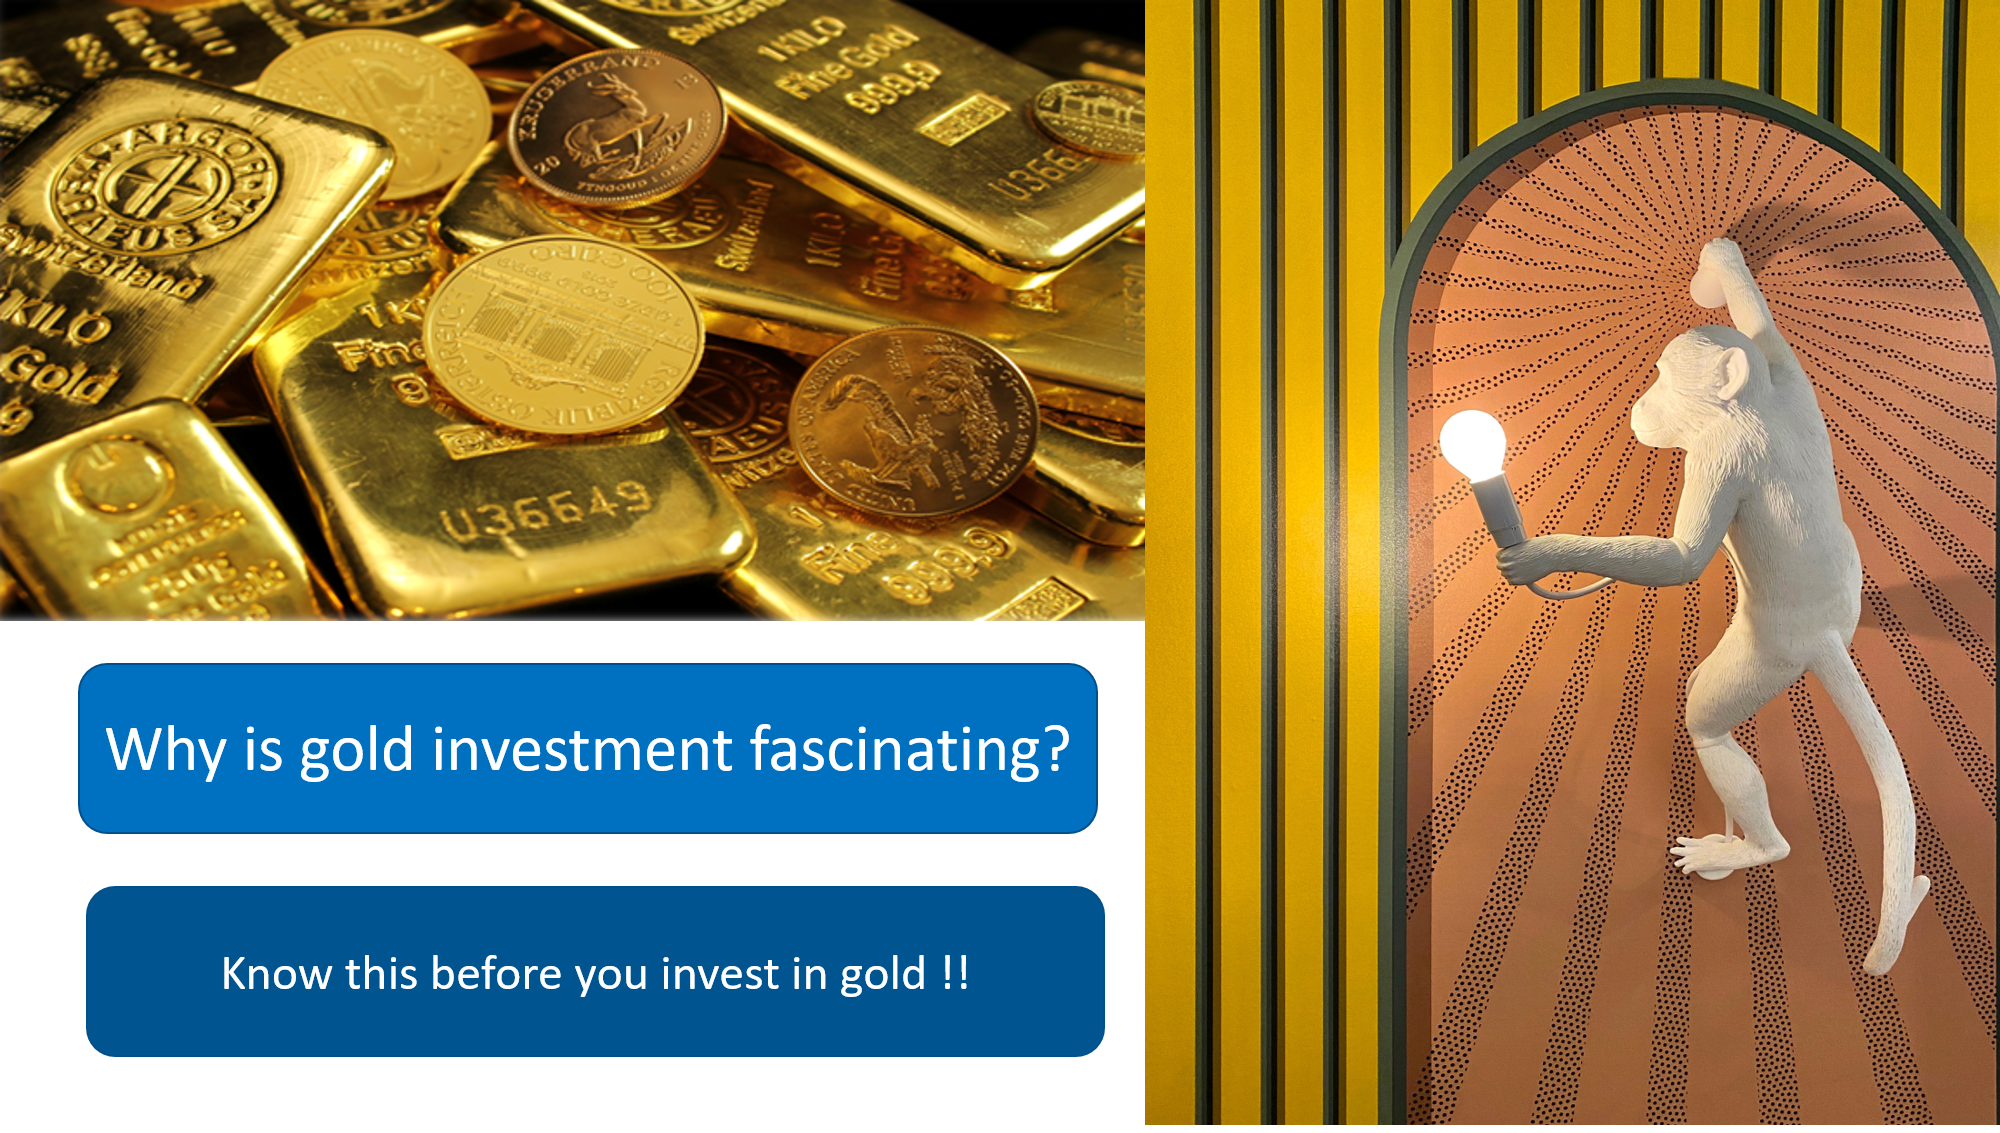 Videos on Gold Investment Options